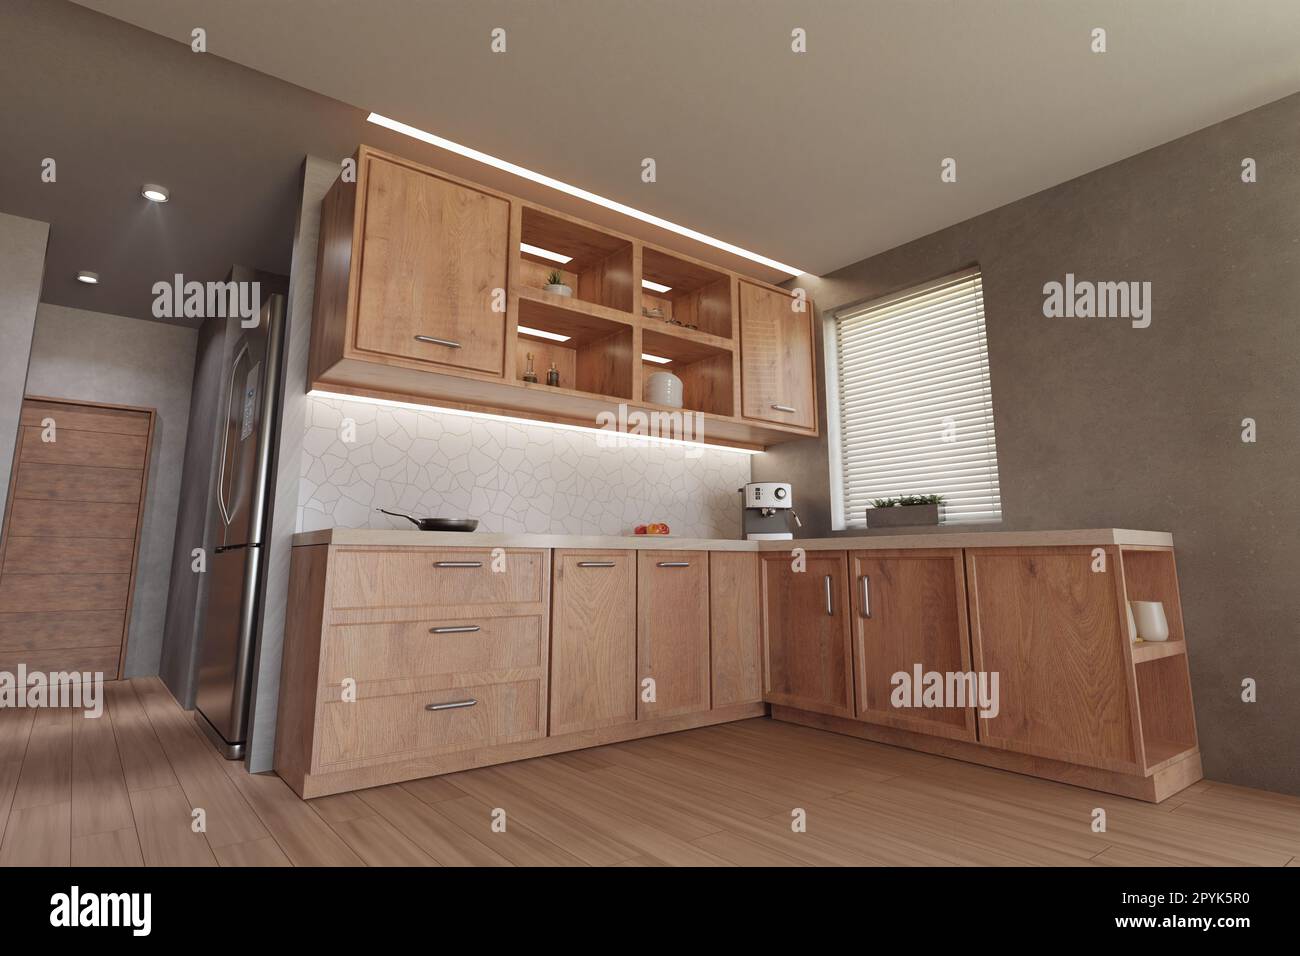 3D render interior kitchen, wooden cabinets, dining table, decorations and food. fisheye effect Stock Photo